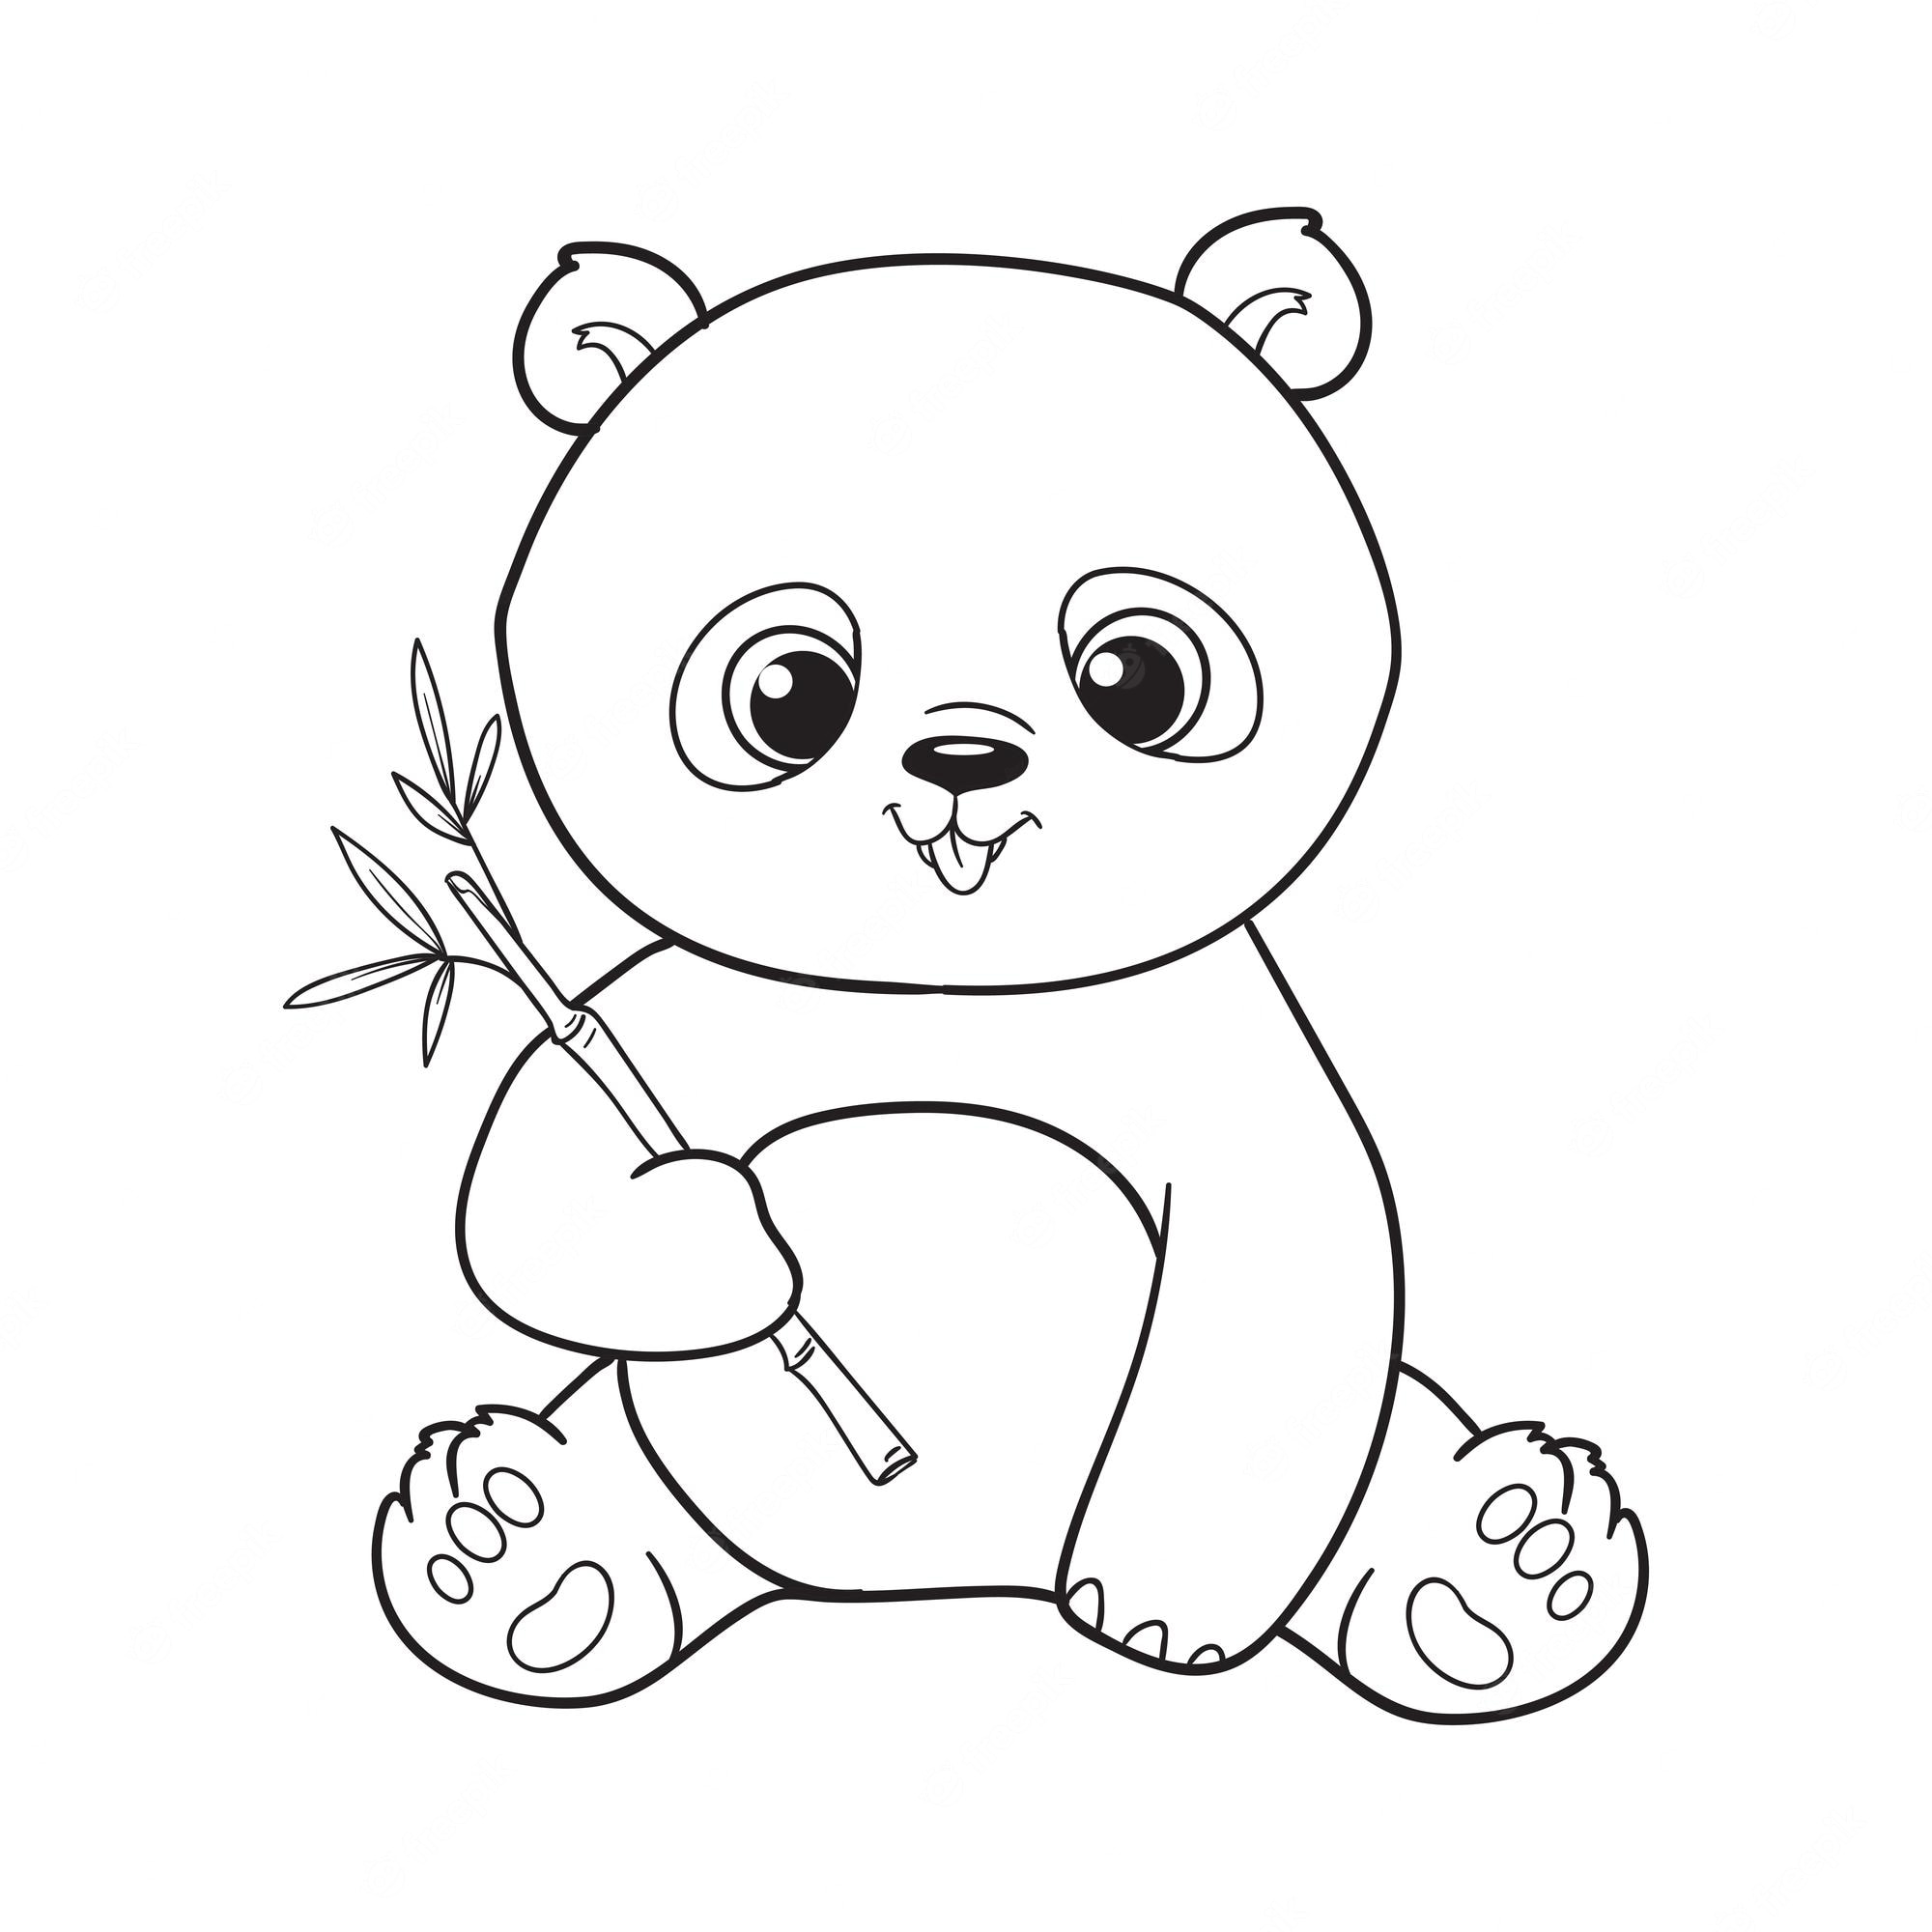 Premium Vector | Coloring pages or books for kids cute panda illustration